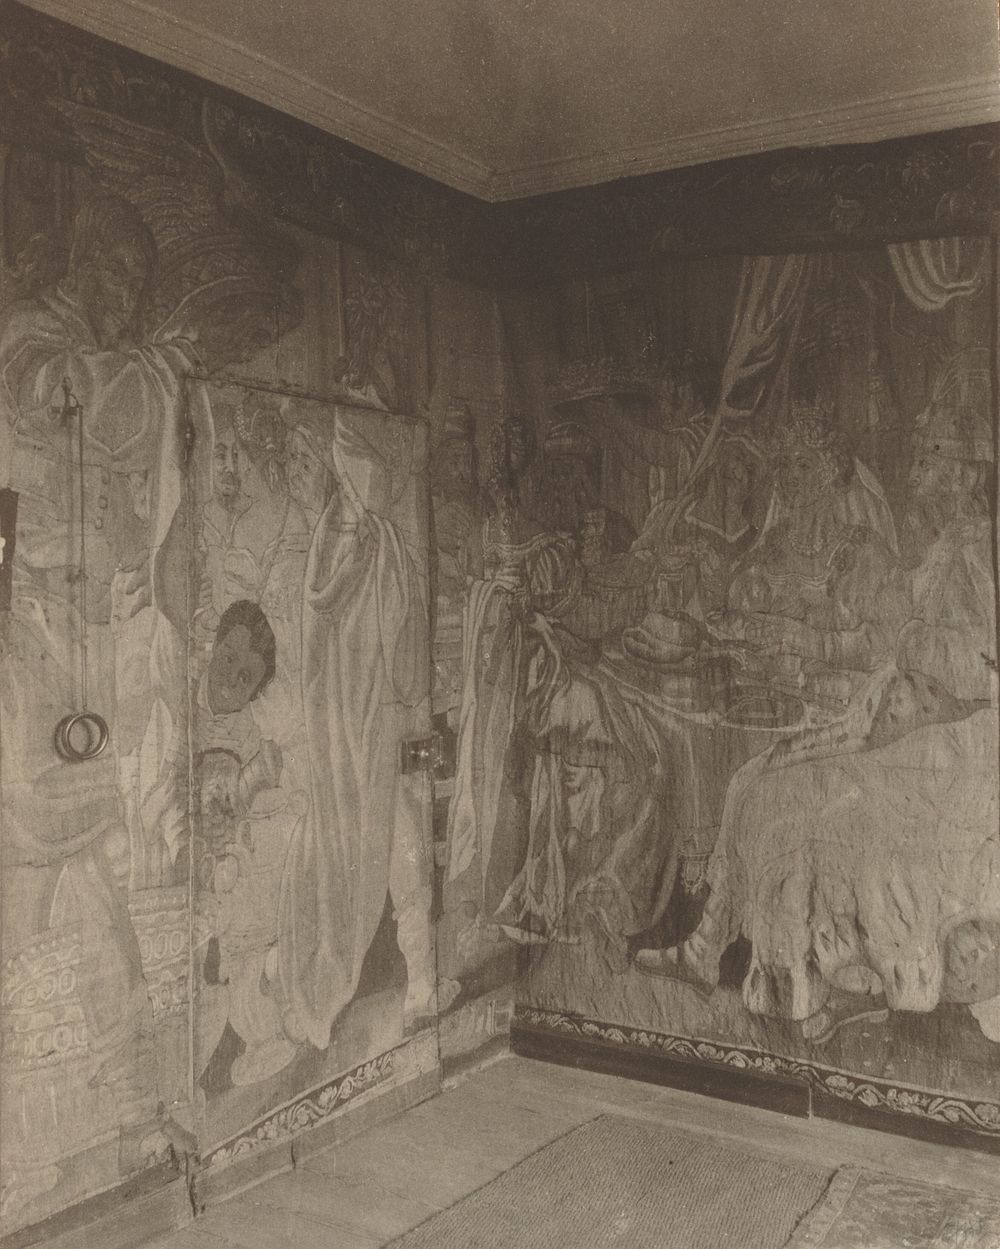 Kelmscott Manor: In the Tapestry Room by Frederick H Evans